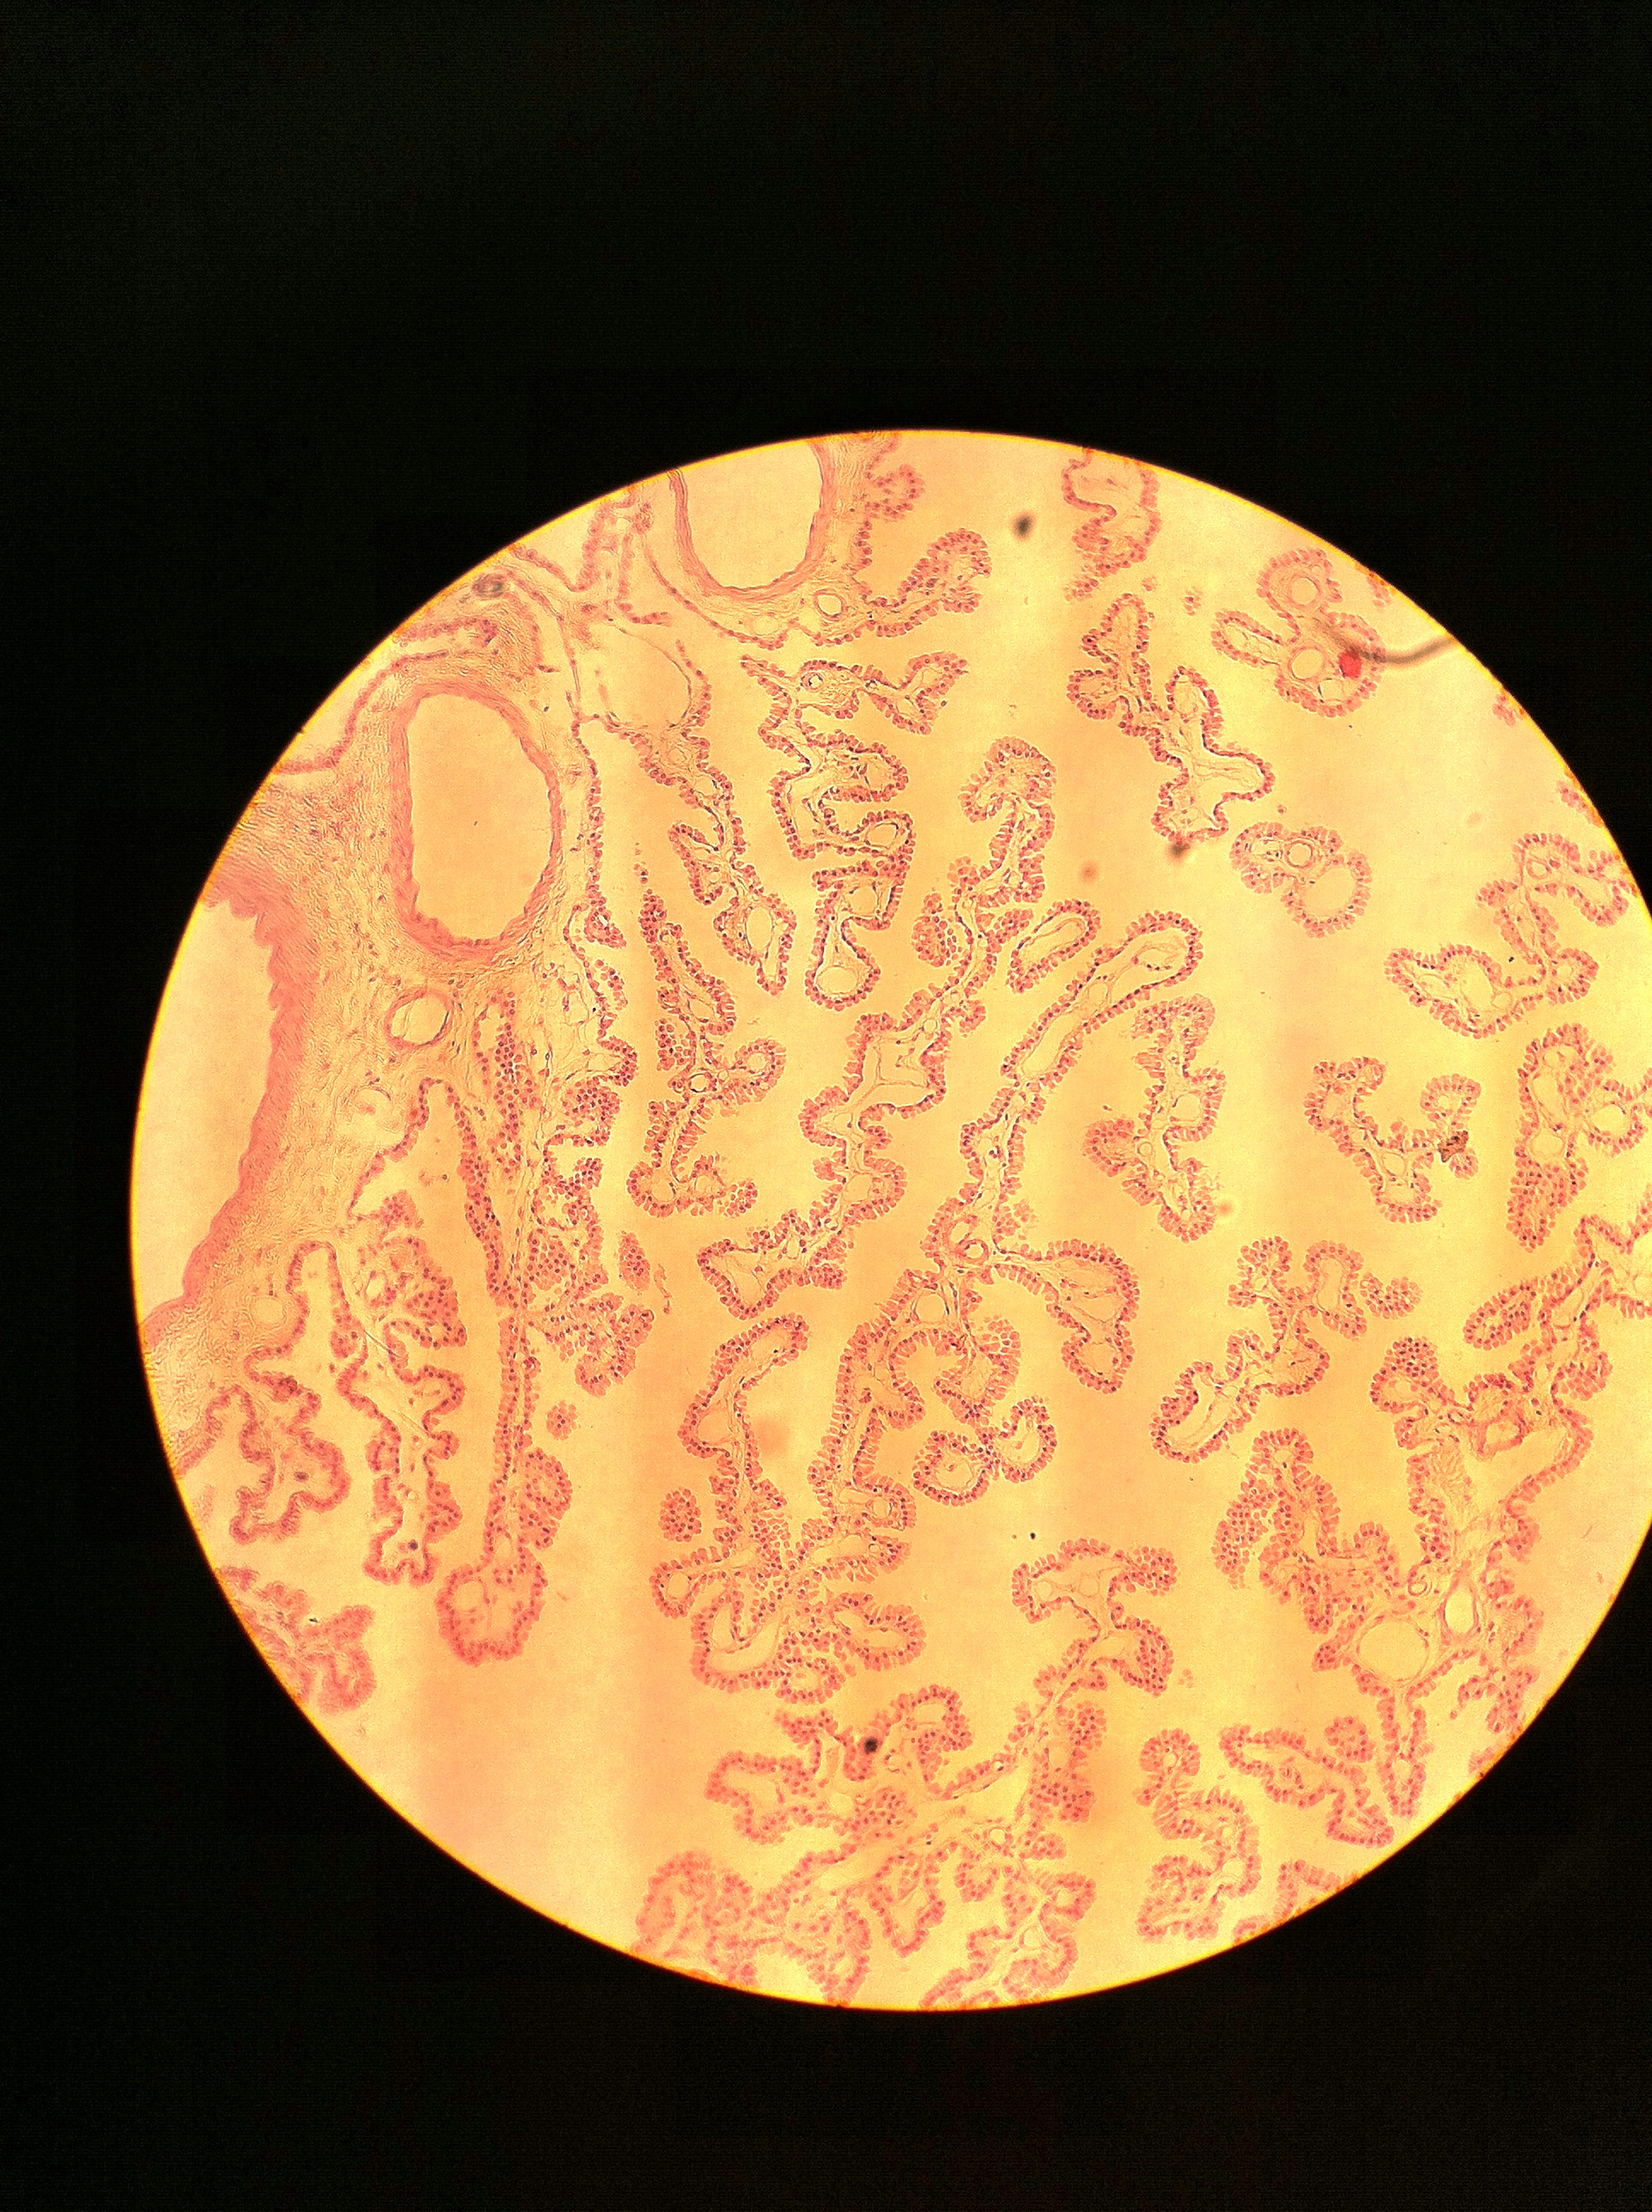 Ependymal Cells 100X